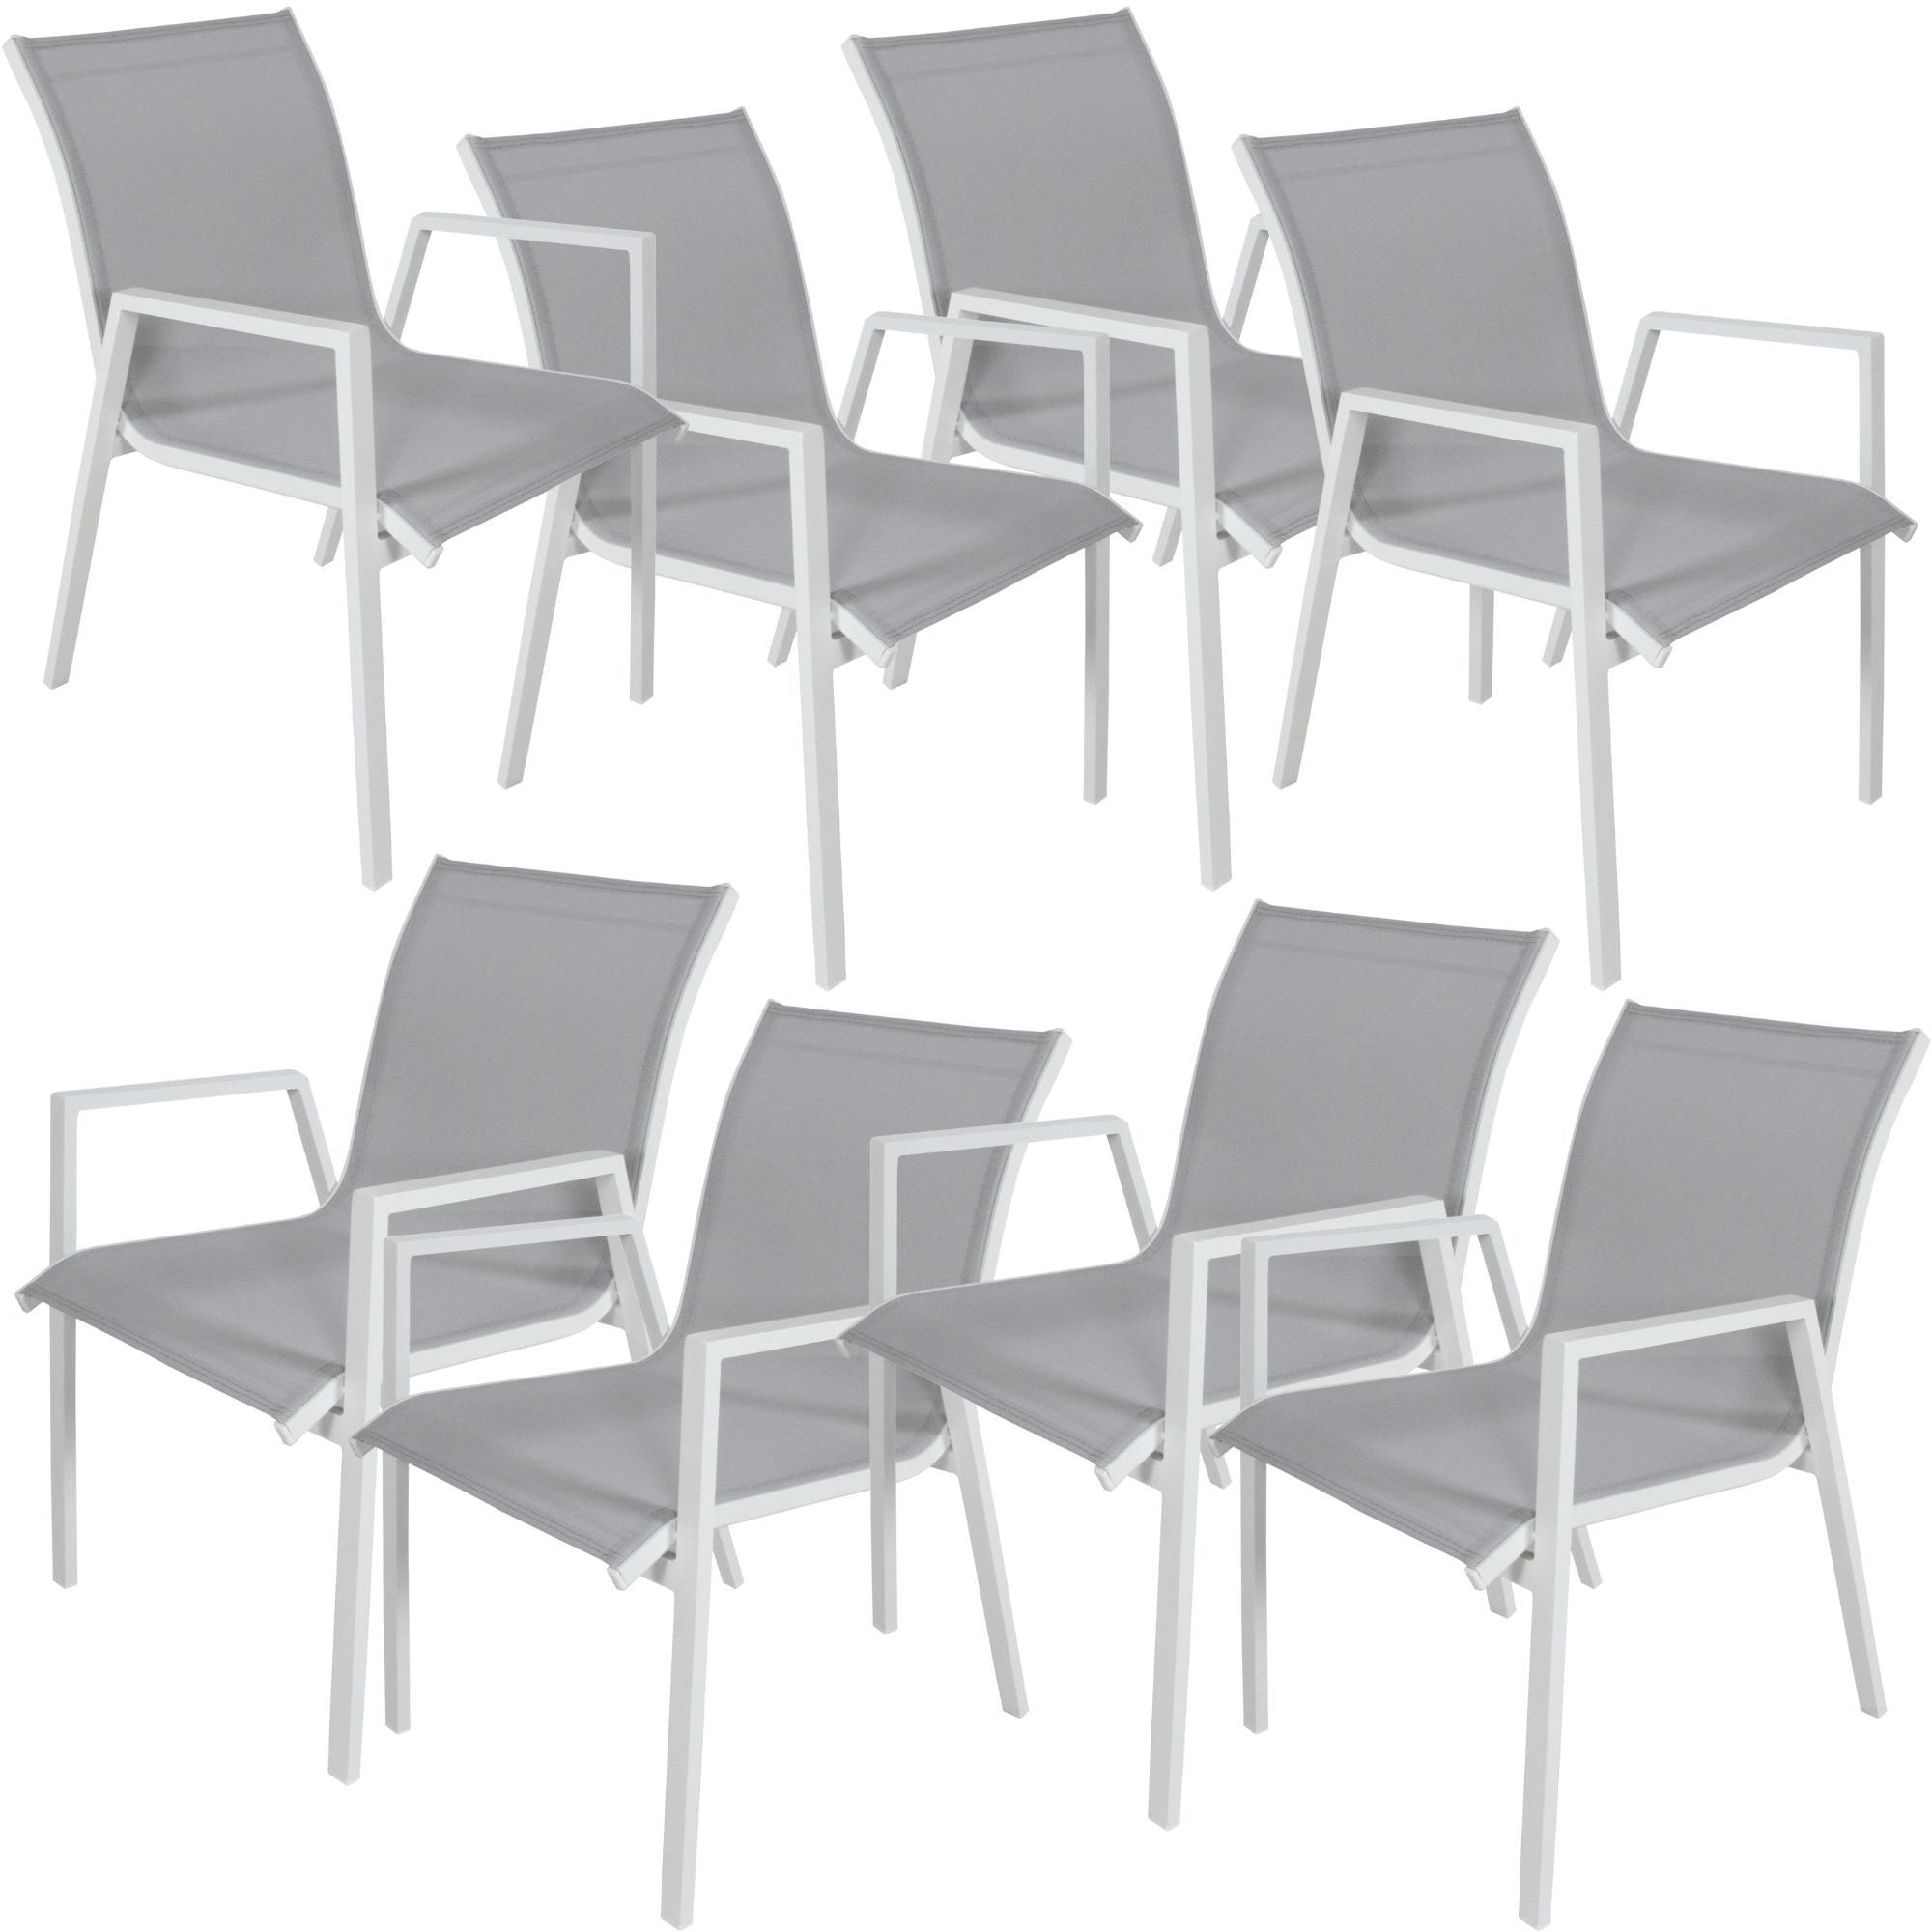 8pc All-Weather Aluminium Outdoor Dining Chairs Set